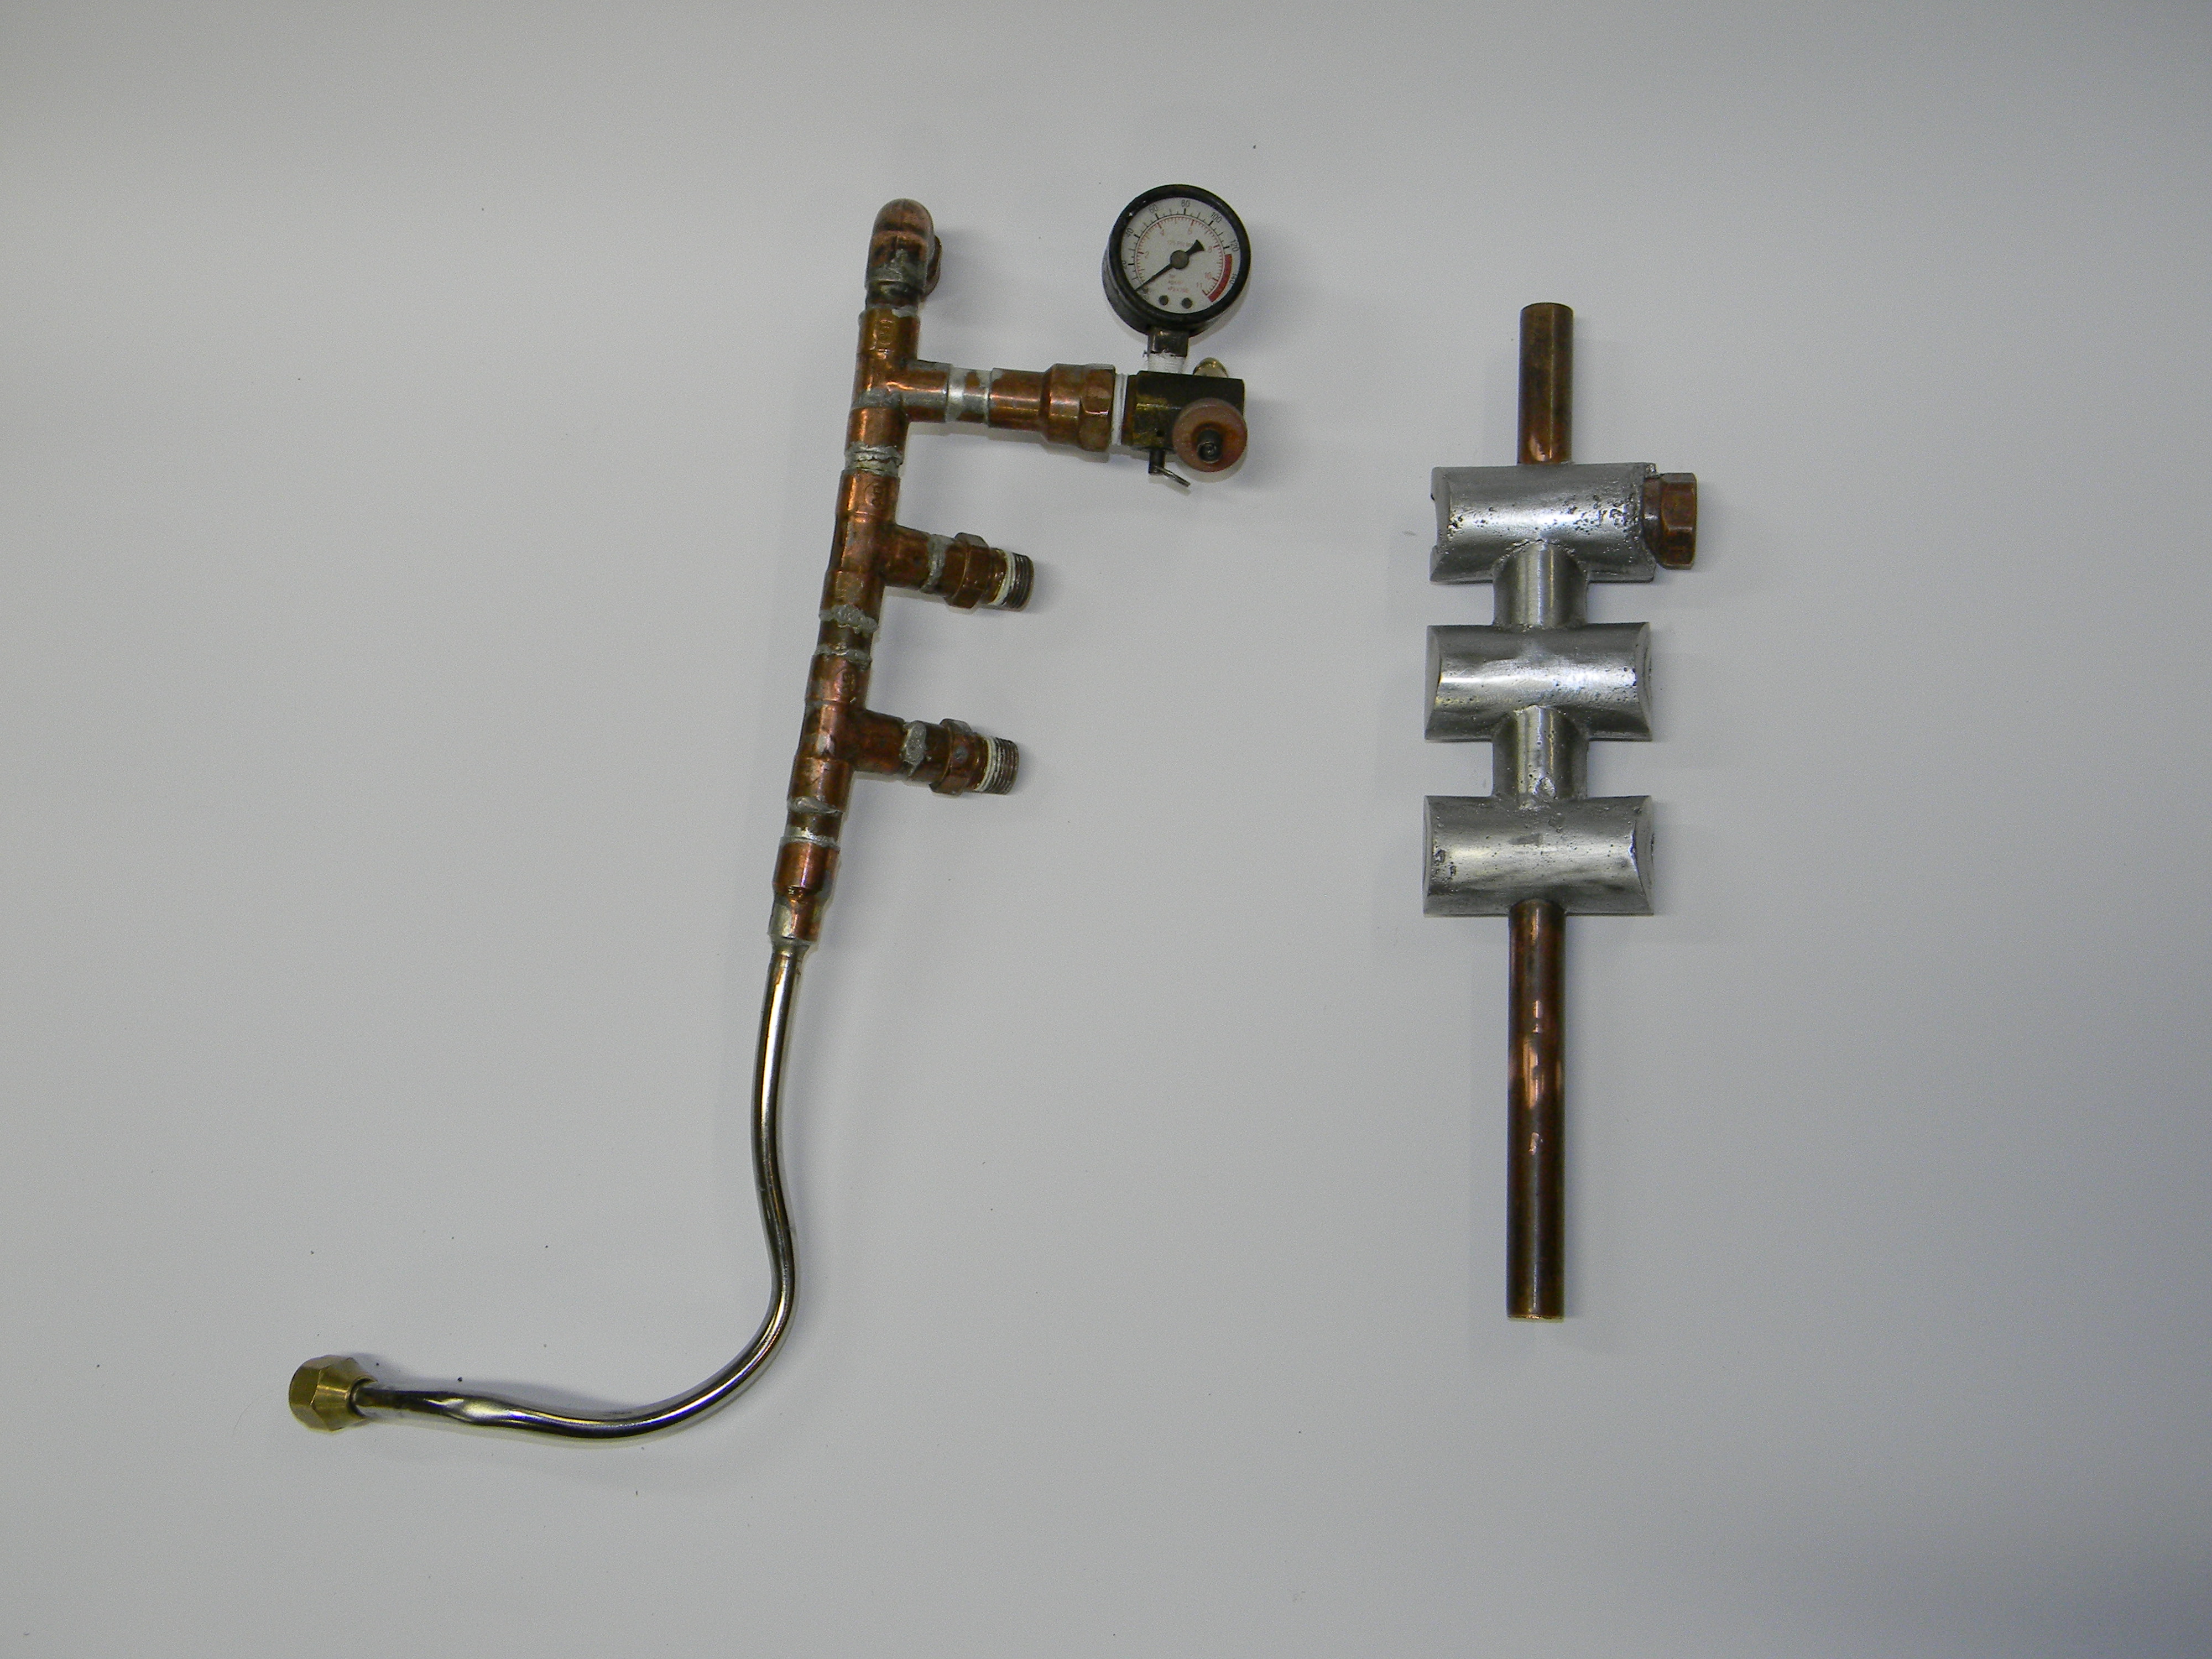 First and second generation manifolds